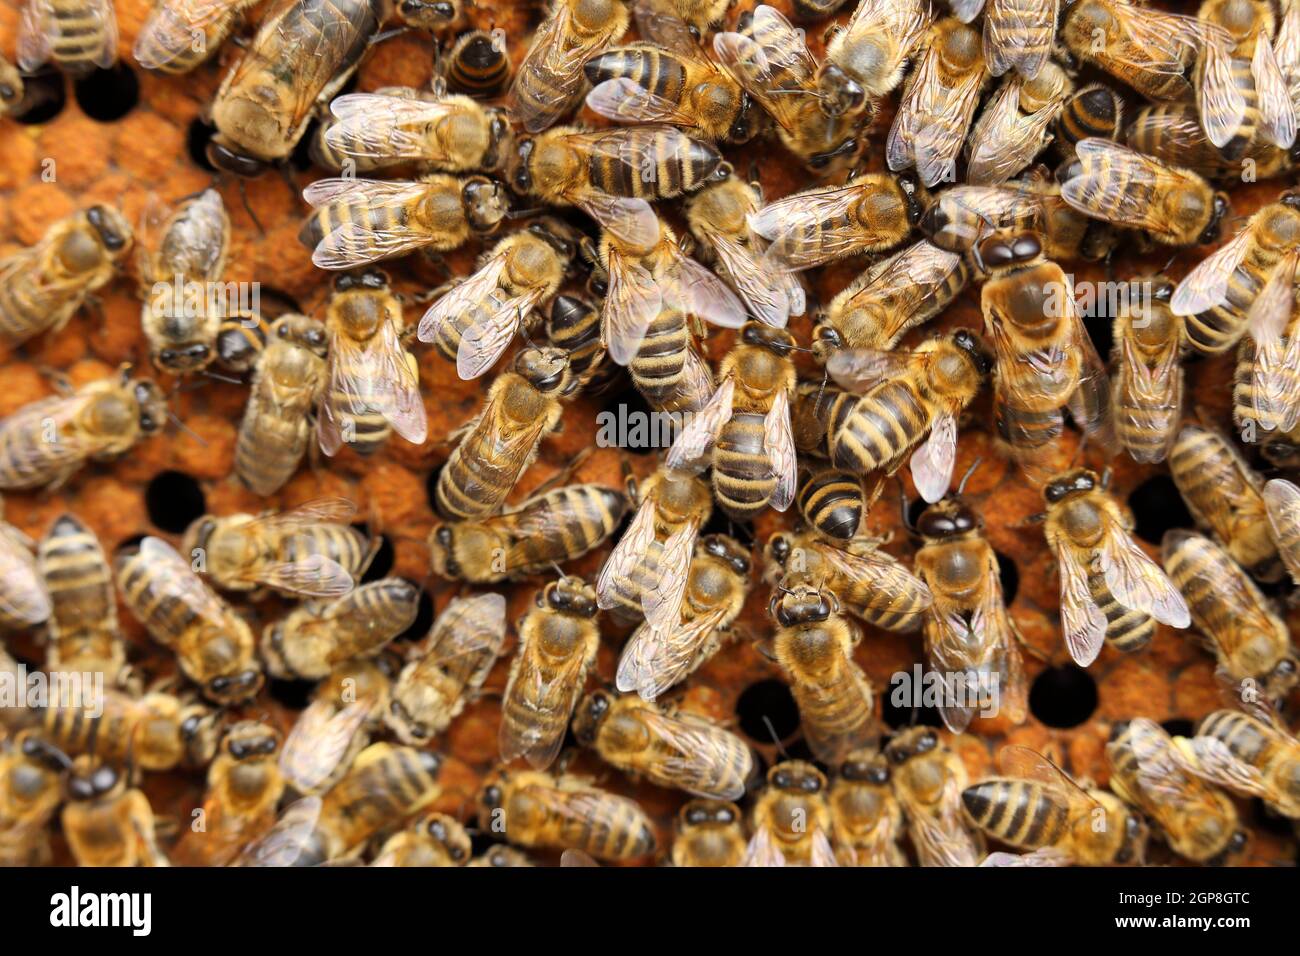 Many Honey bees in a yellow beehive on frame. Stock Photo